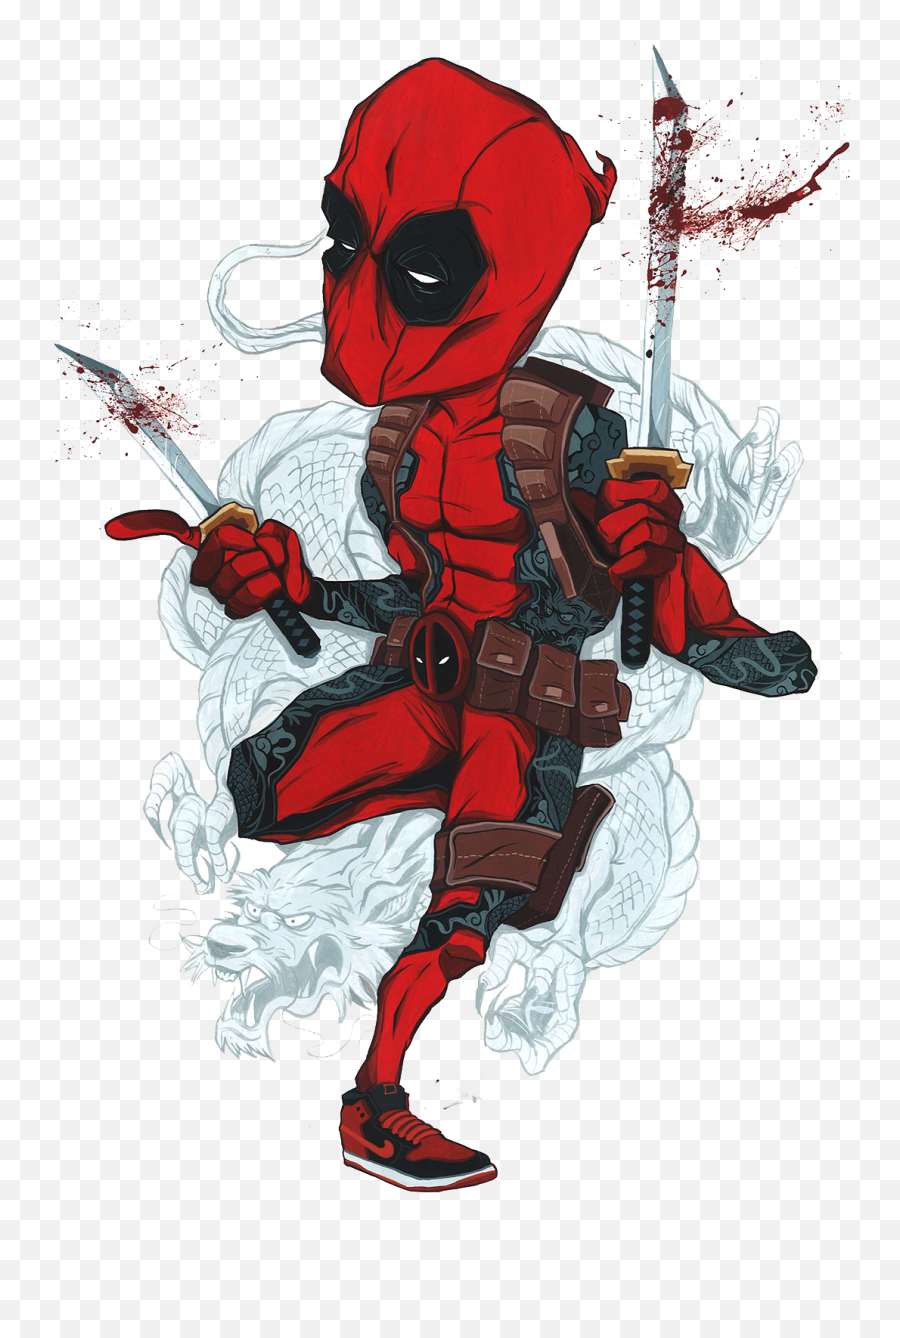 Spiderman Character Fictional - Deadpool And Spiderman Anime Png,Spiderman Cartoon Png